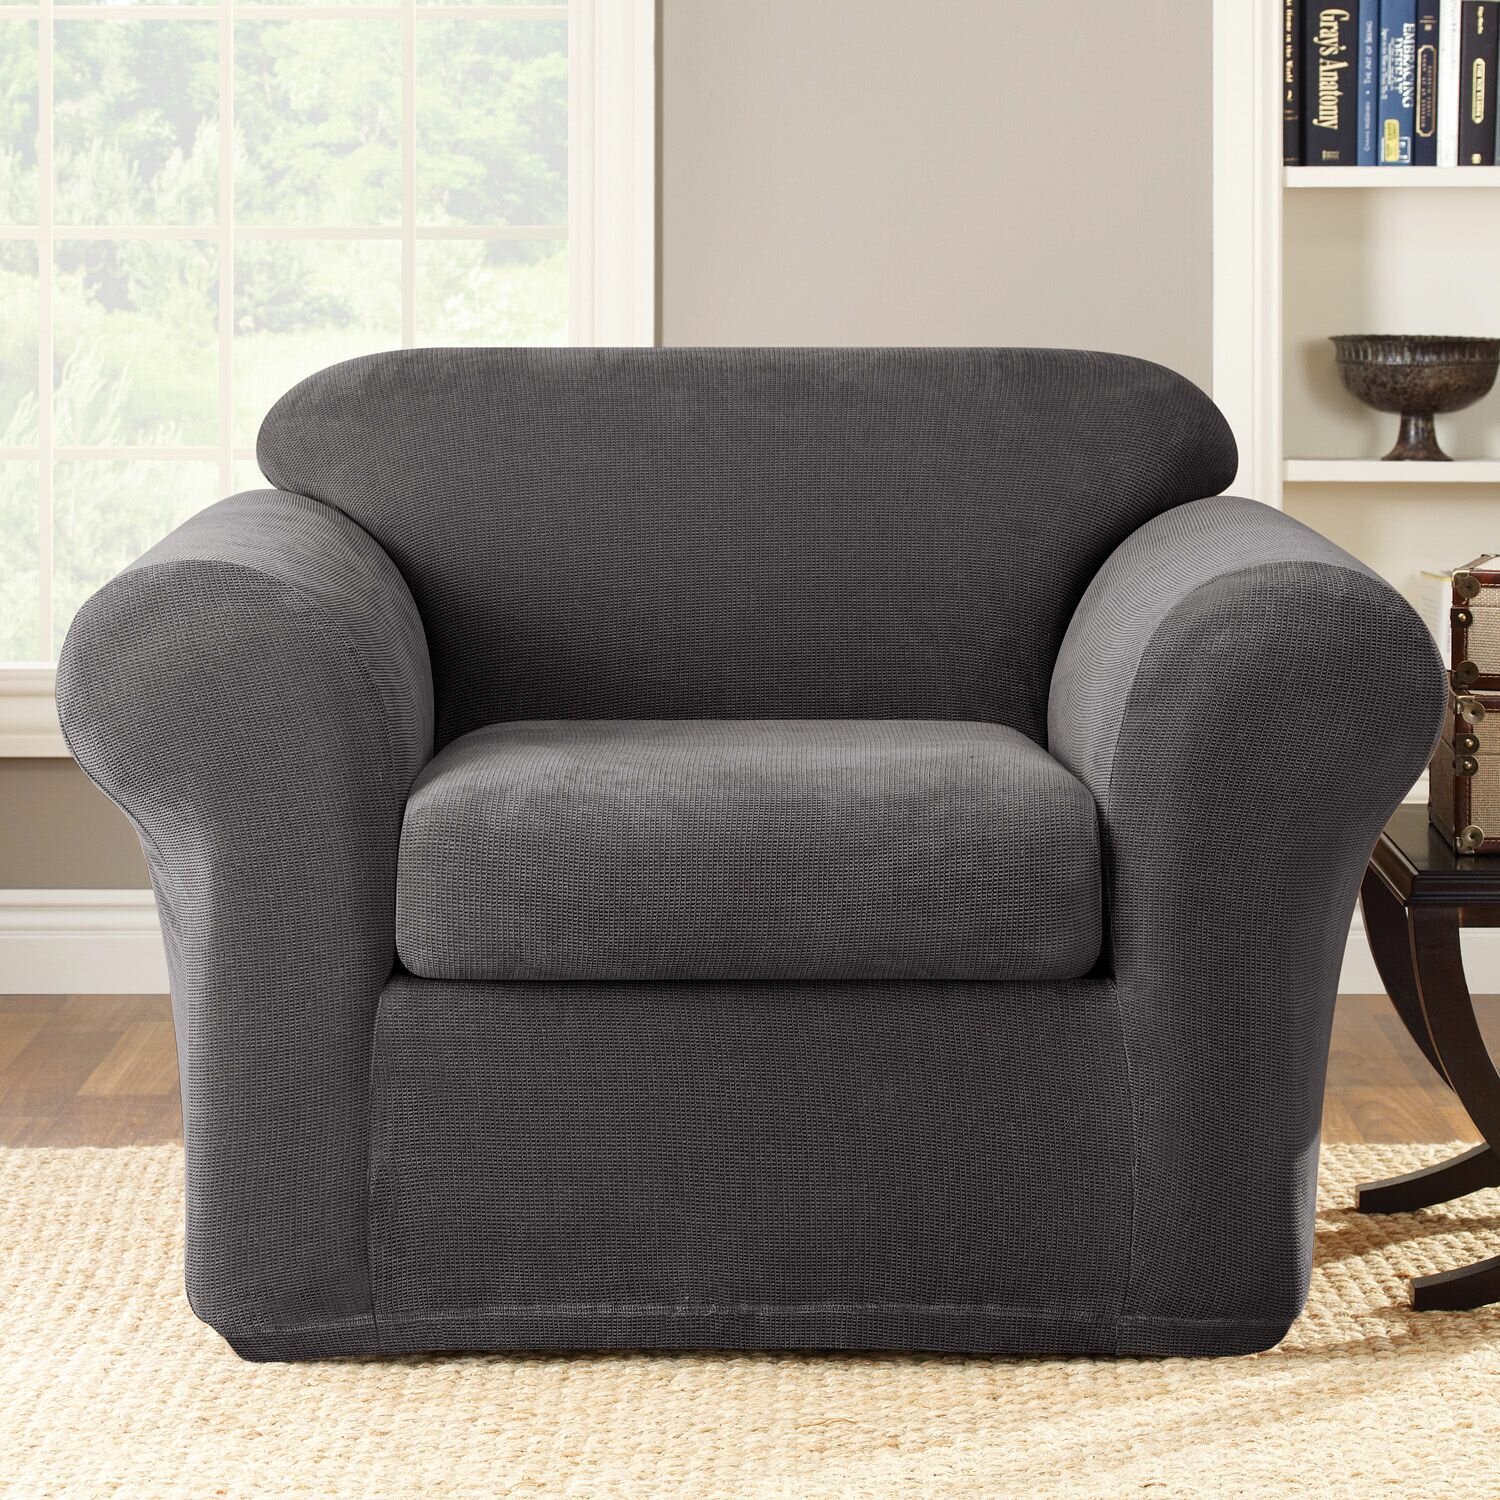 Sure Fit Stretch Slipcovers : Slipcovers - m